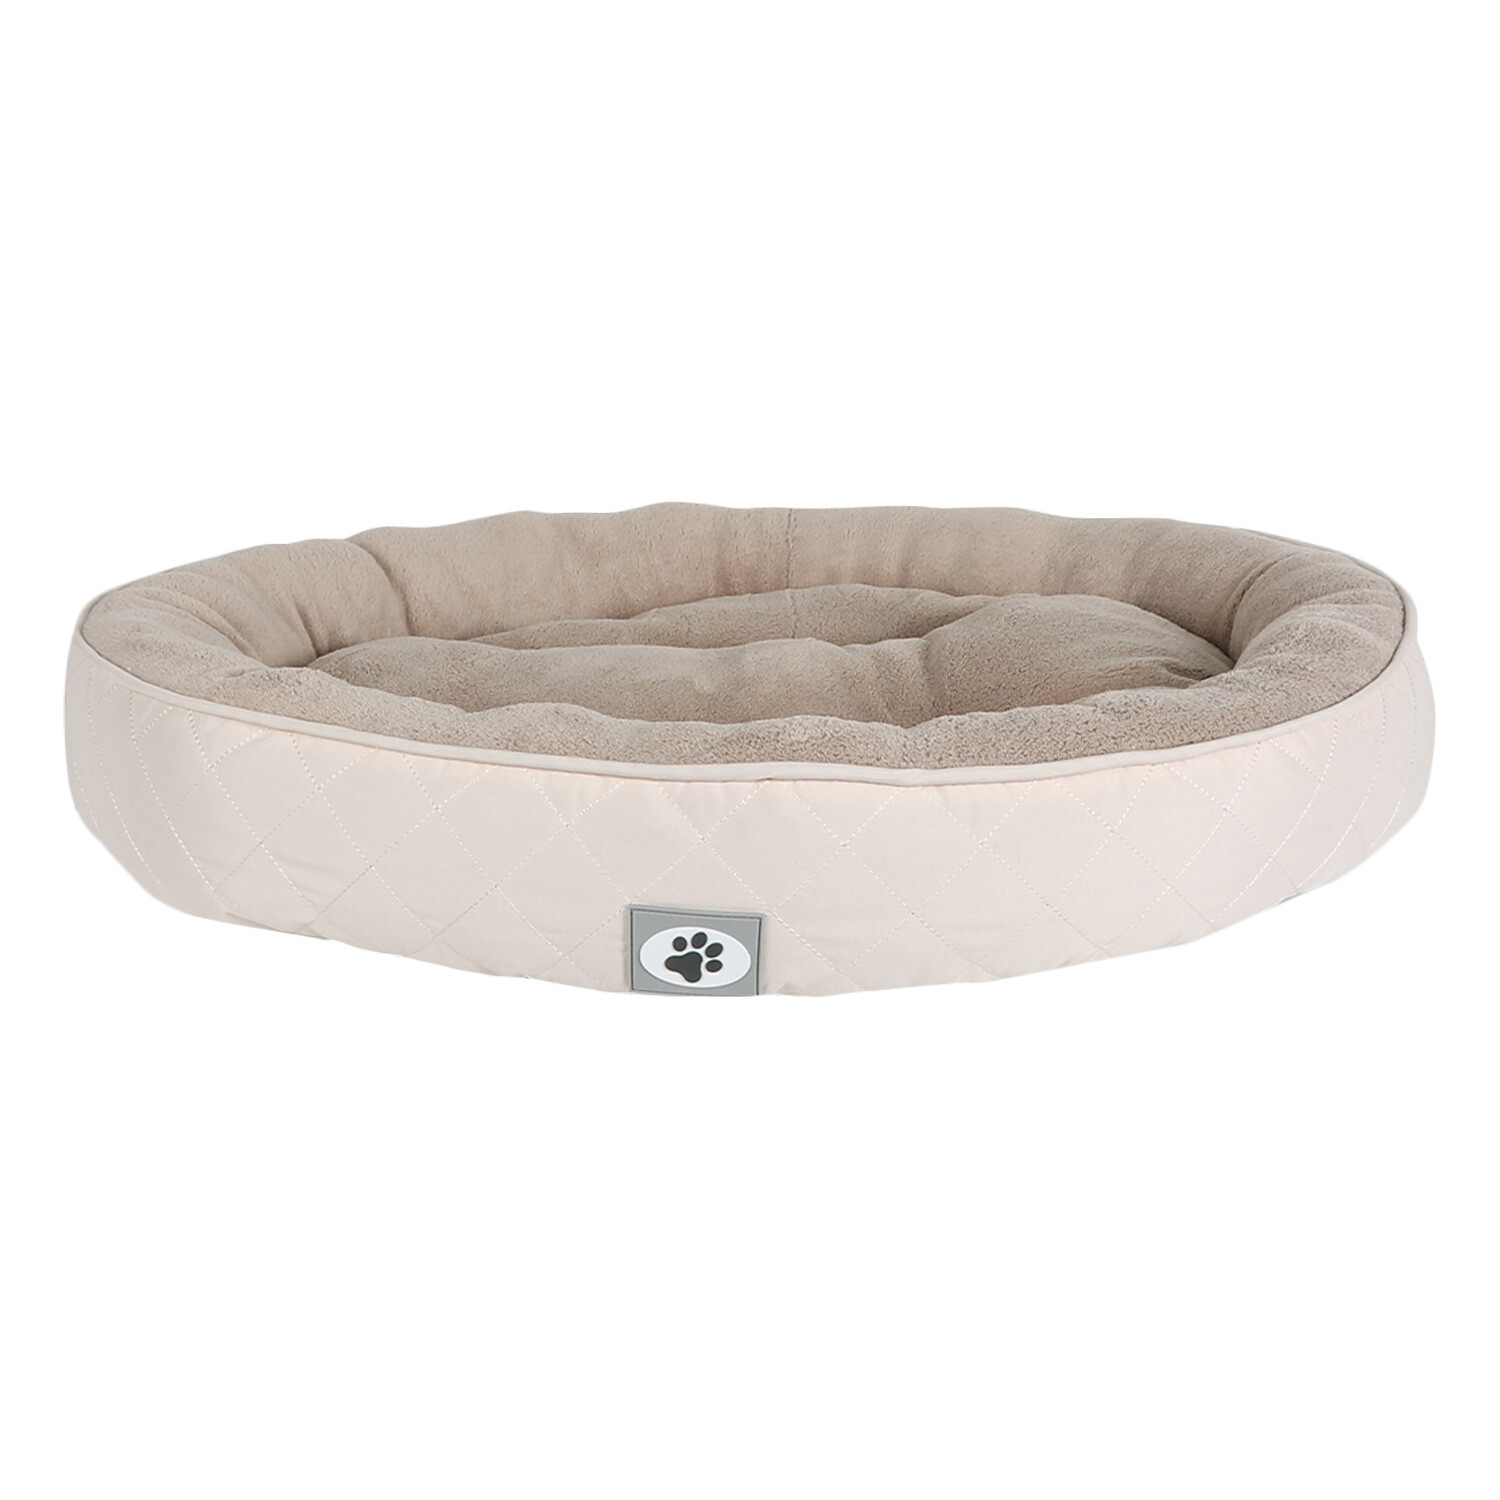 Snuggle Round Pet Bed Image 5